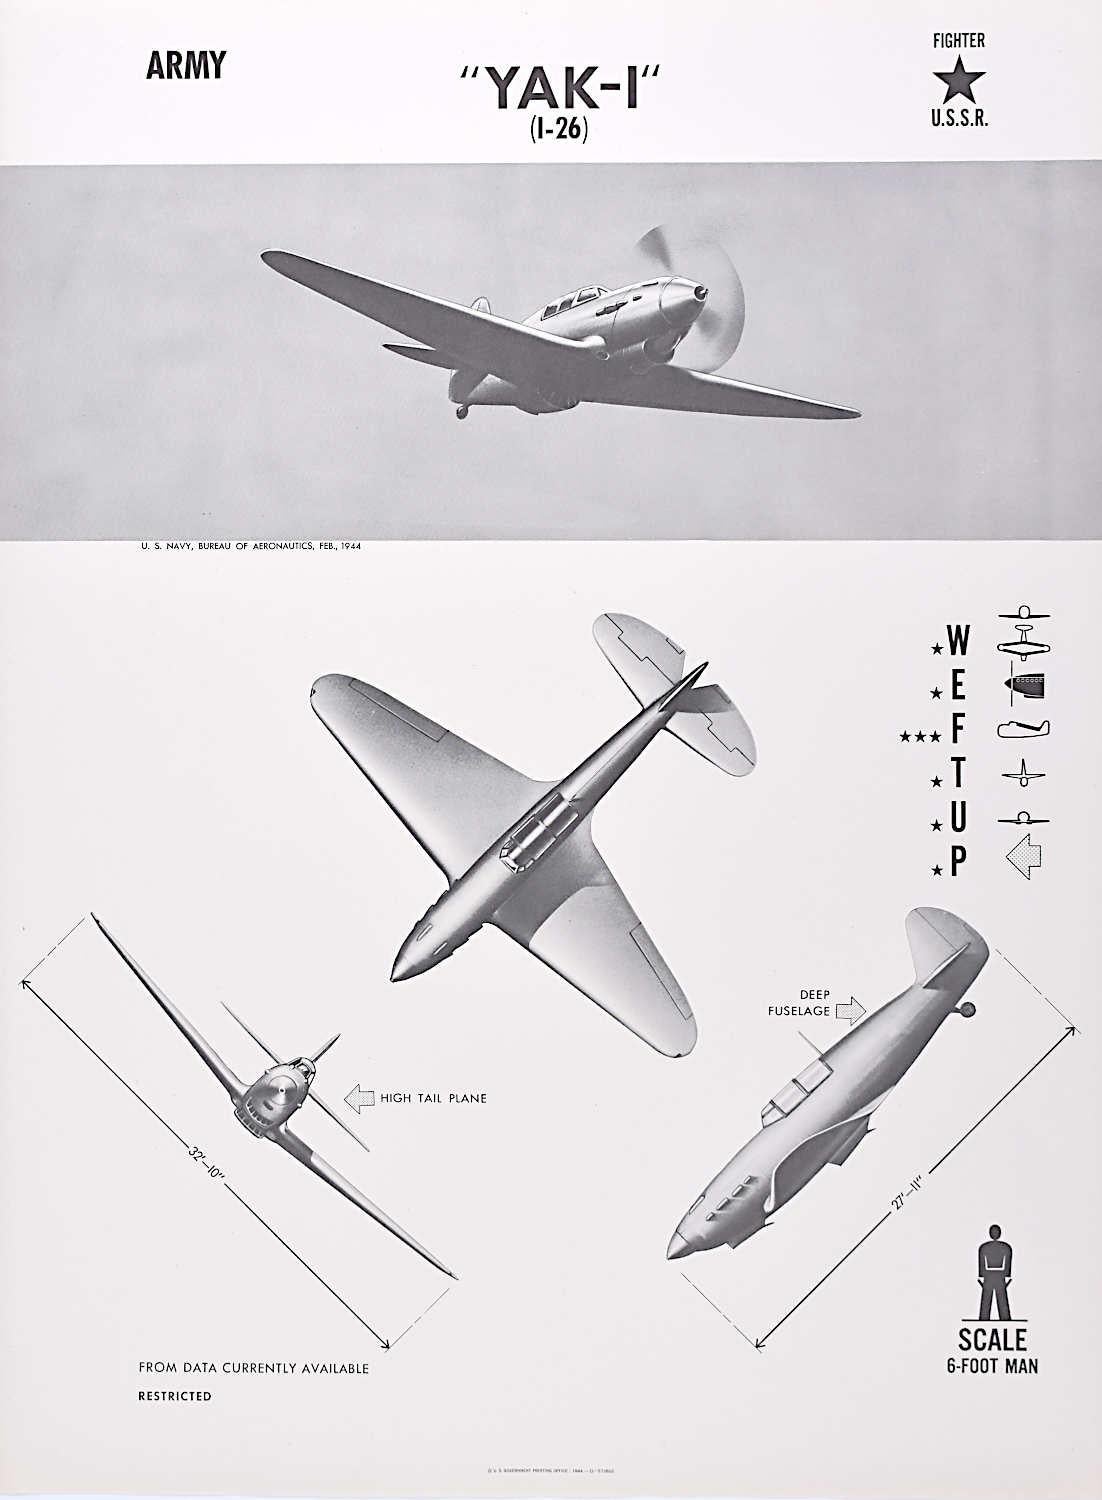 1944 Army "YAK-1" USSR fighter plane identification poster WW2 - Print by Unknown